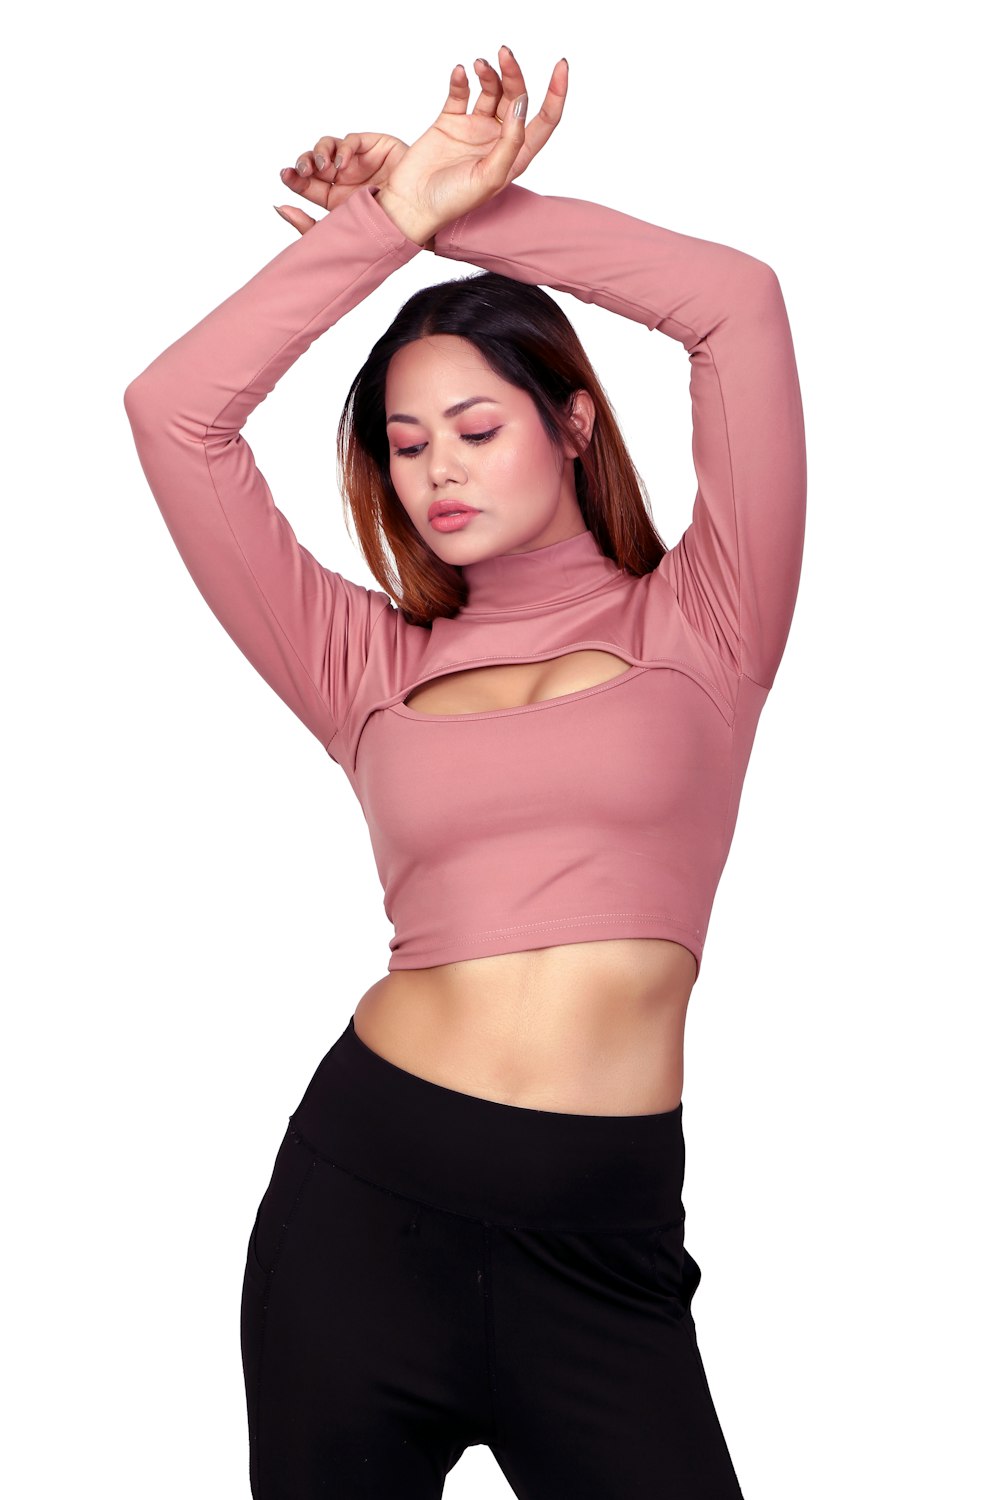 a woman in a pink top and black pants